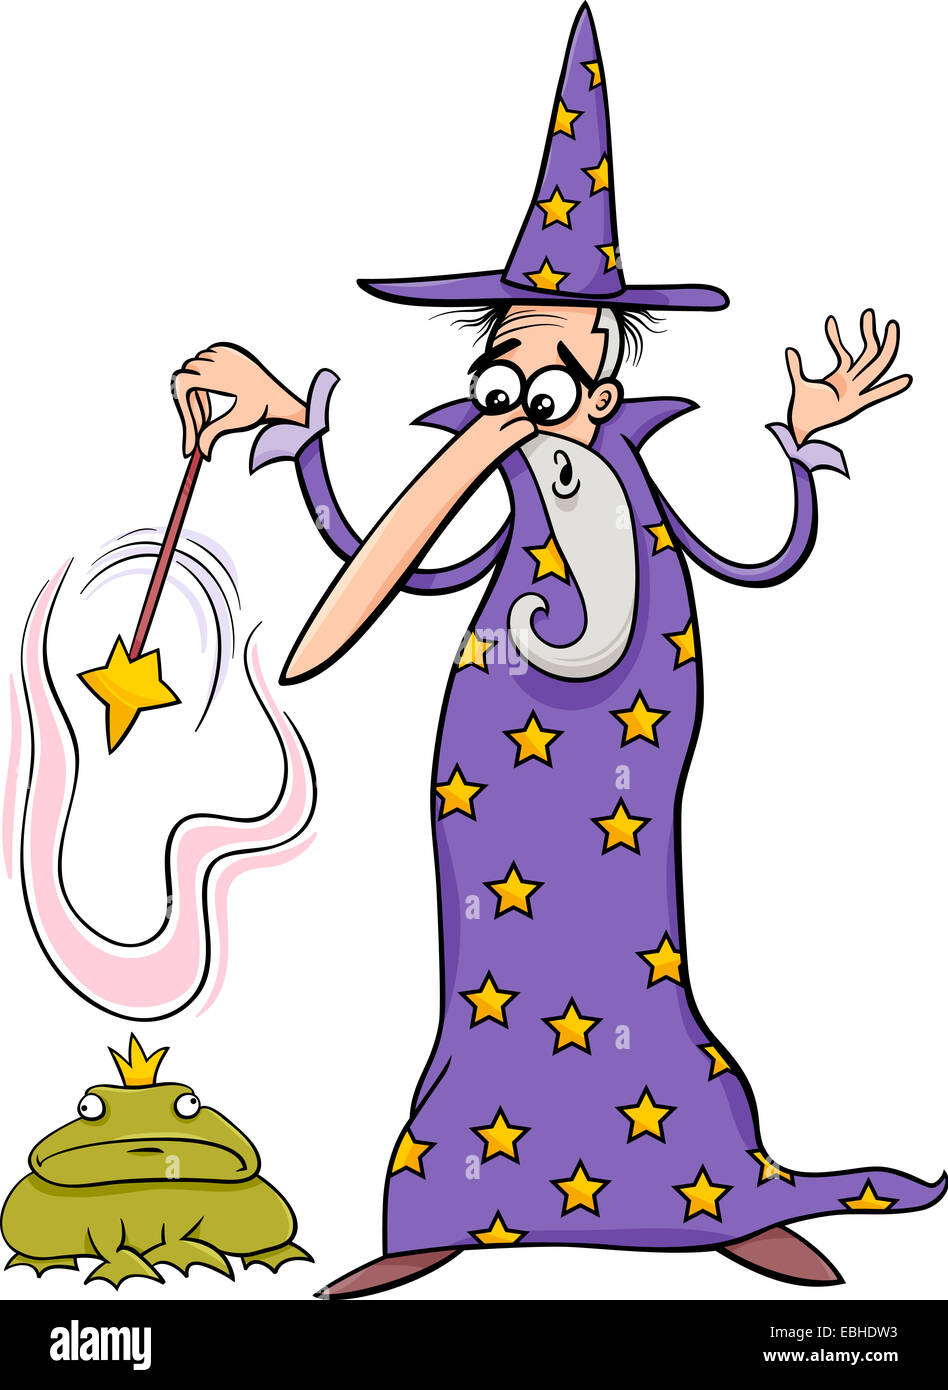 Cartoon illustration of Fantasy Wizard with Magic Wand Casting a Spell and Enchanted Frog Stock Photo